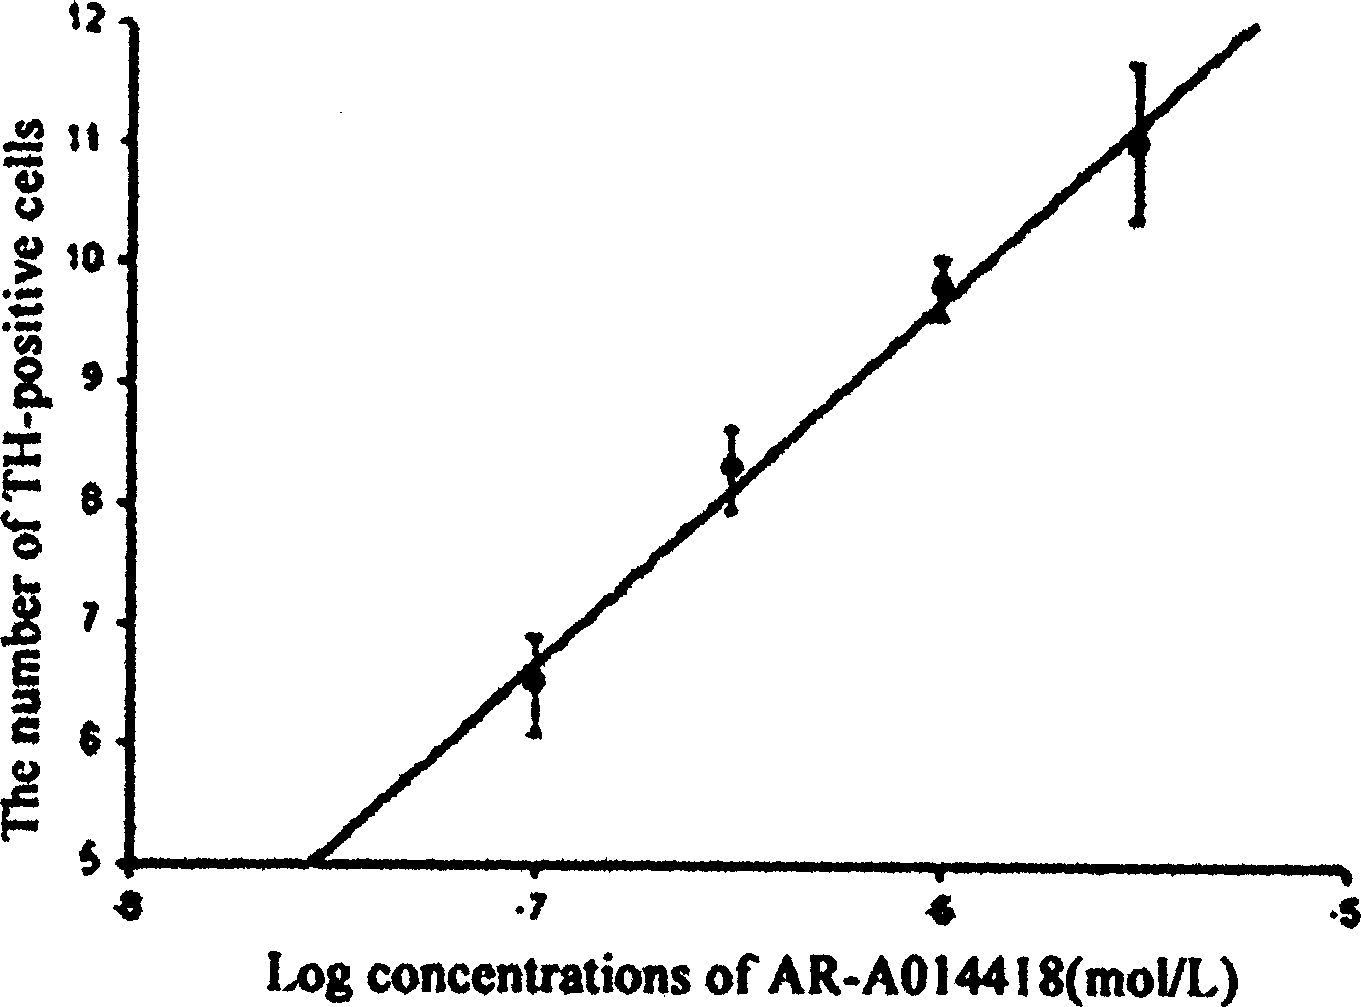 Use of AR-A014418 in preparing medicine for preventing and treating nerve degenerative diseases